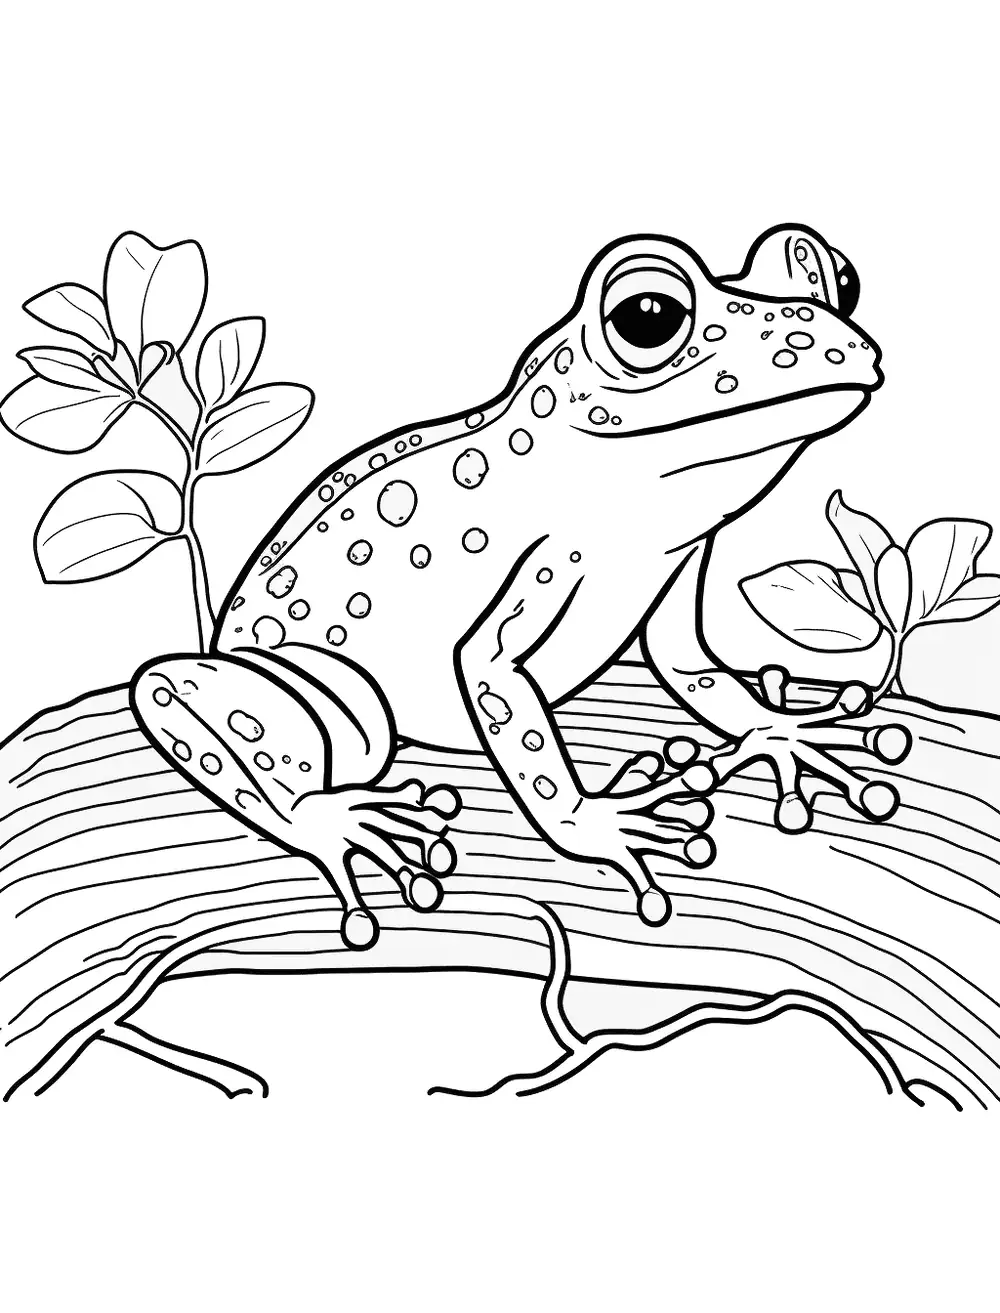 Tree Frog On a Branch Coloring Page - A tree frog sitting on a branch with leaves and flowers.